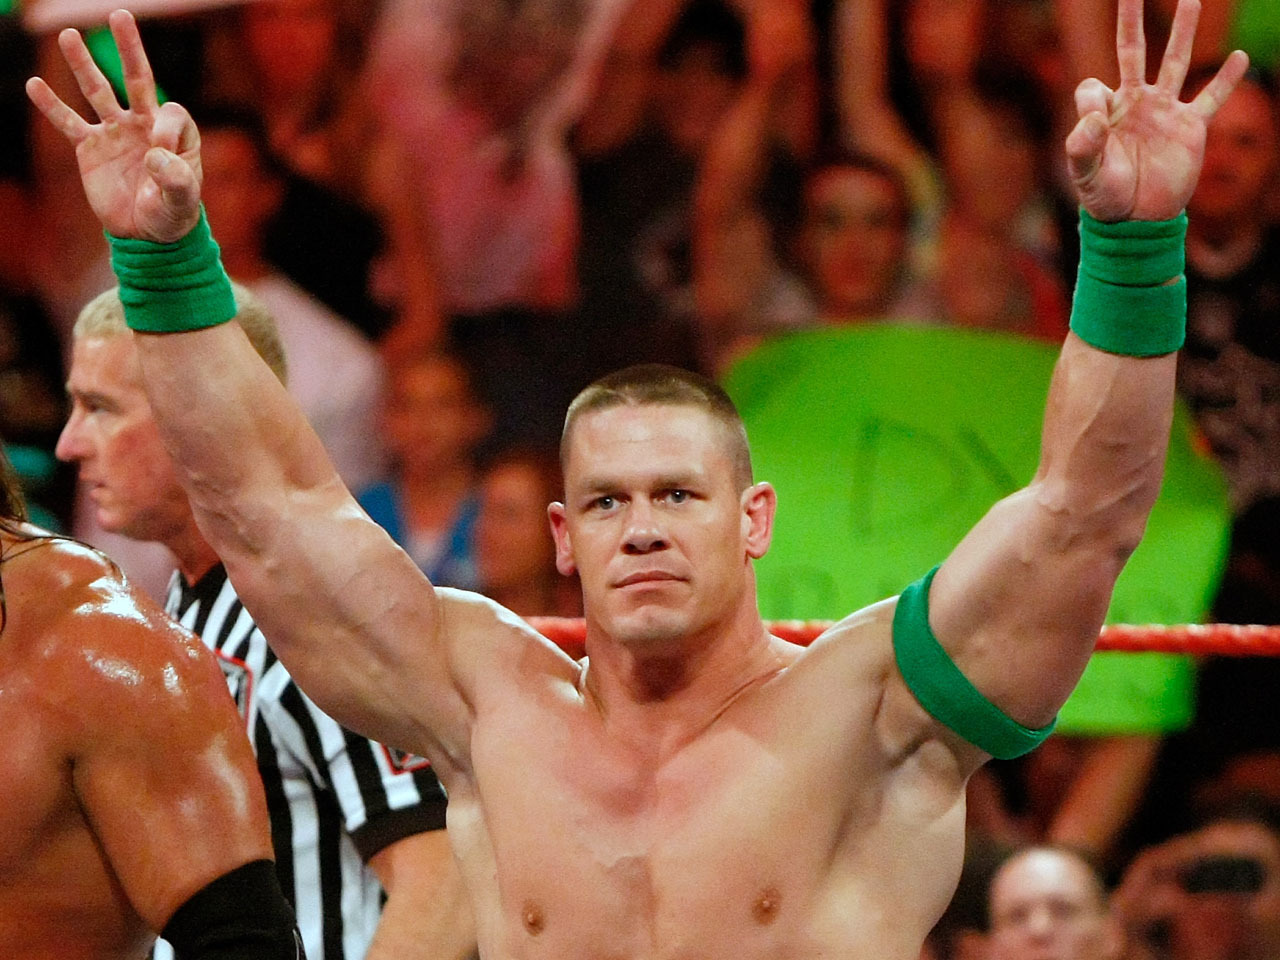 John Cena feud with The Rock rages on - CBS News